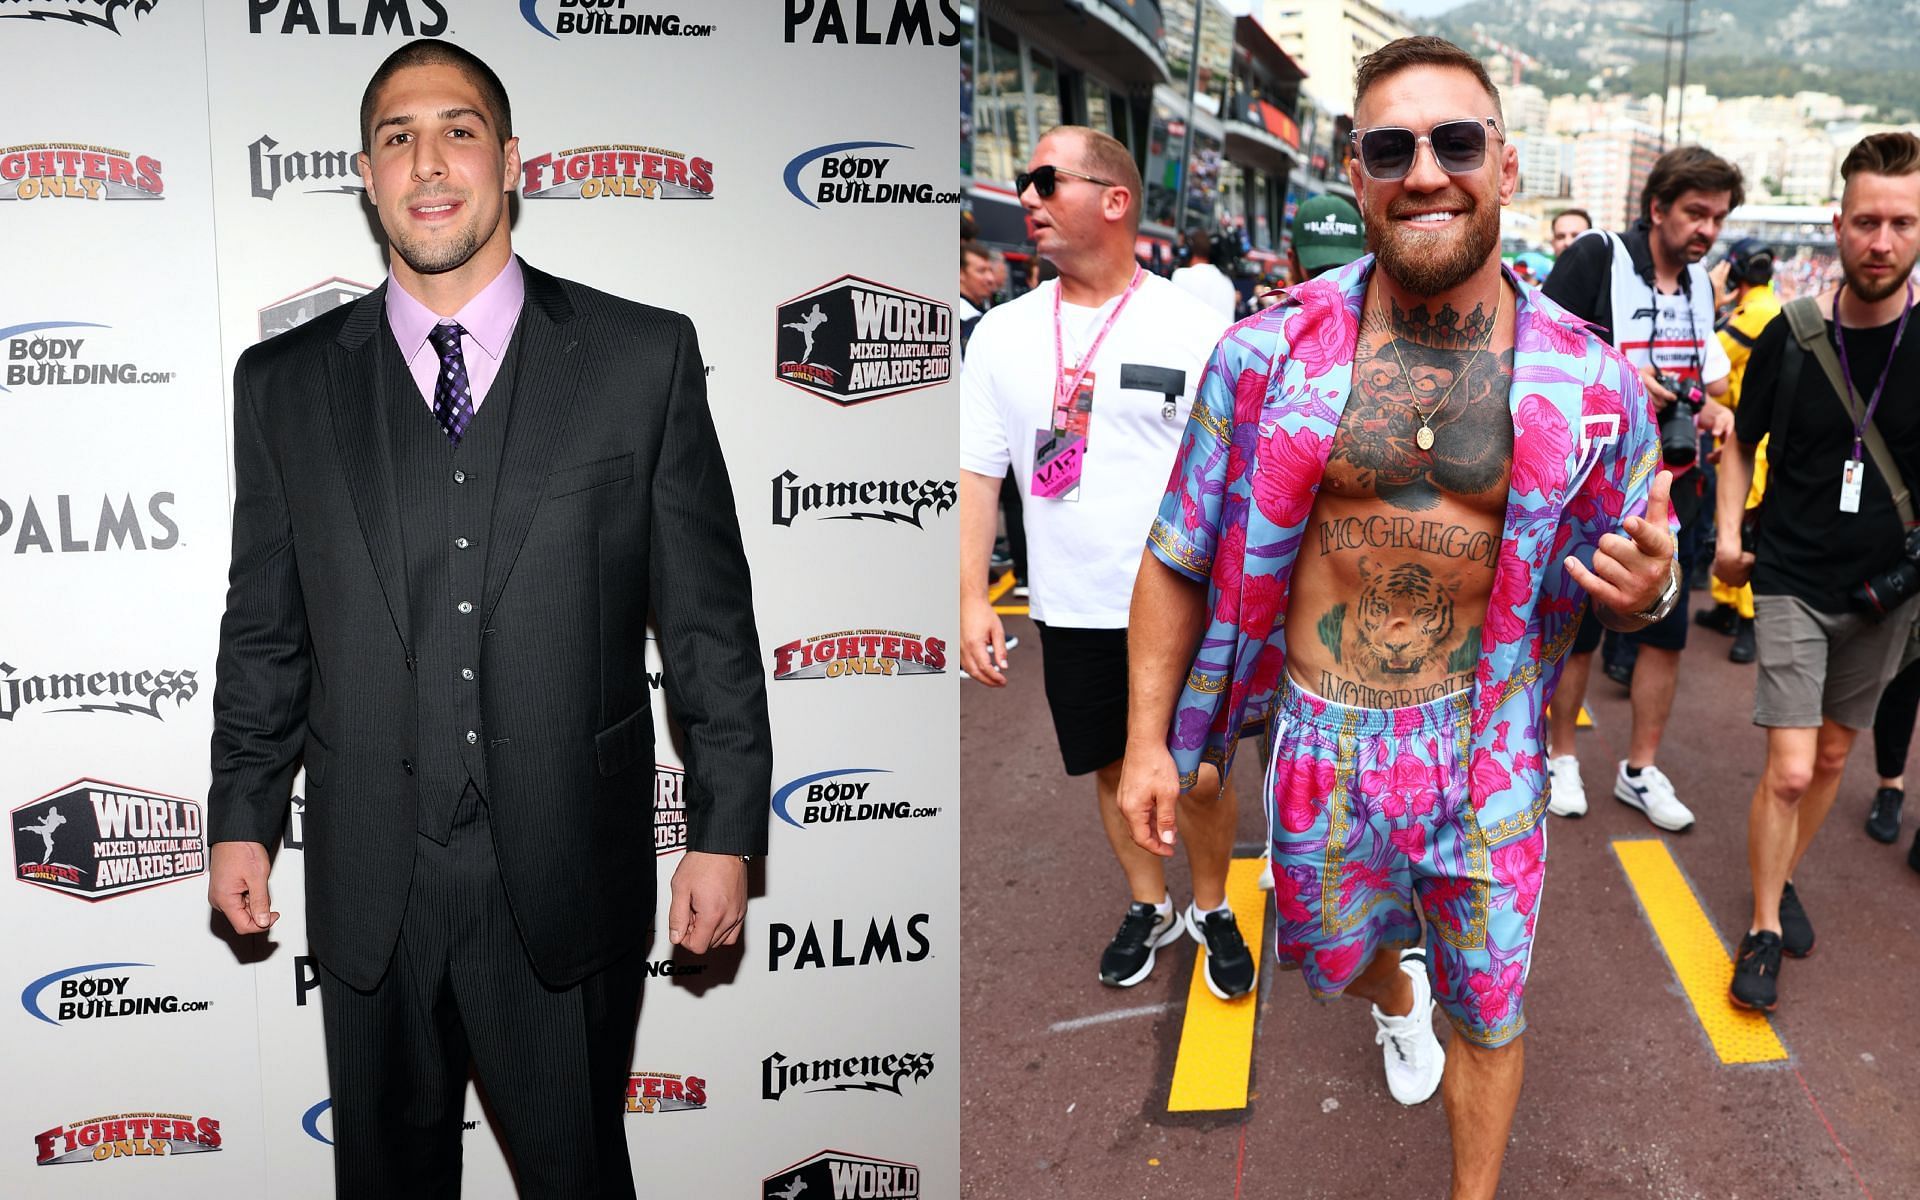 Brendan Schaub (left) and Conor McGregor (right) [Image Courtesy: Getty Images]